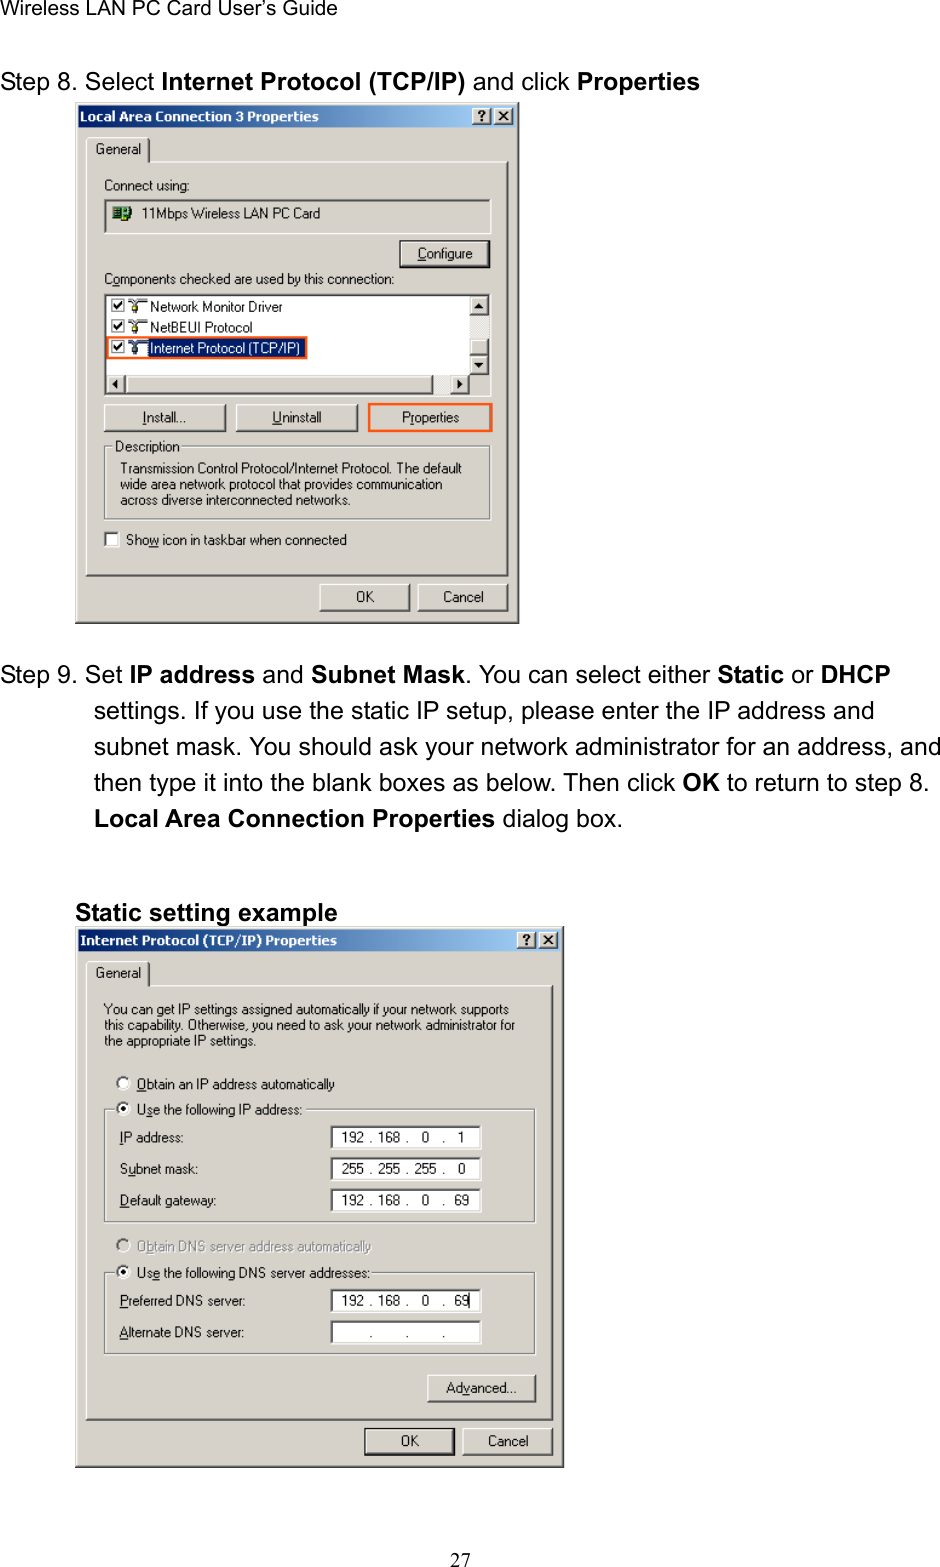 Wireless LAN PC Card User’s Guide27Step 8. Select Internet Protocol (TCP/IP) and click PropertiesStep 9. Set IP address and Subnet Mask. You can select either Static or DHCPsettings. If you use the static IP setup, please enter the IP address andsubnet mask. You should ask your network administrator for an address, andthen type it into the blank boxes as below. Then click OK to return to step 8.Local Area Connection Properties dialog box.Static setting example